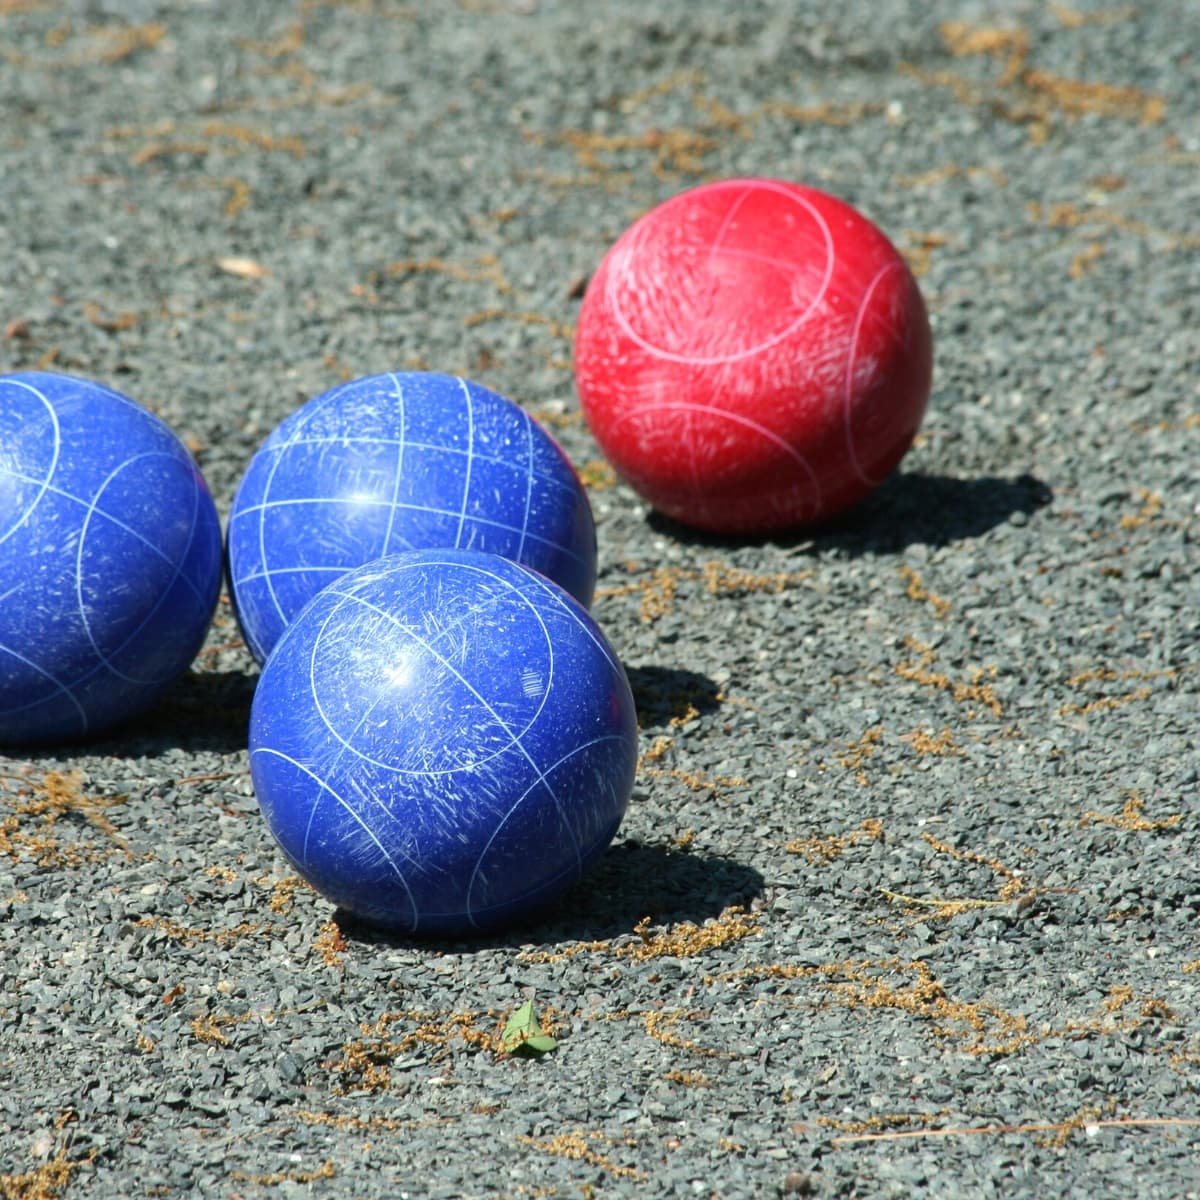 Colors of bocce balls